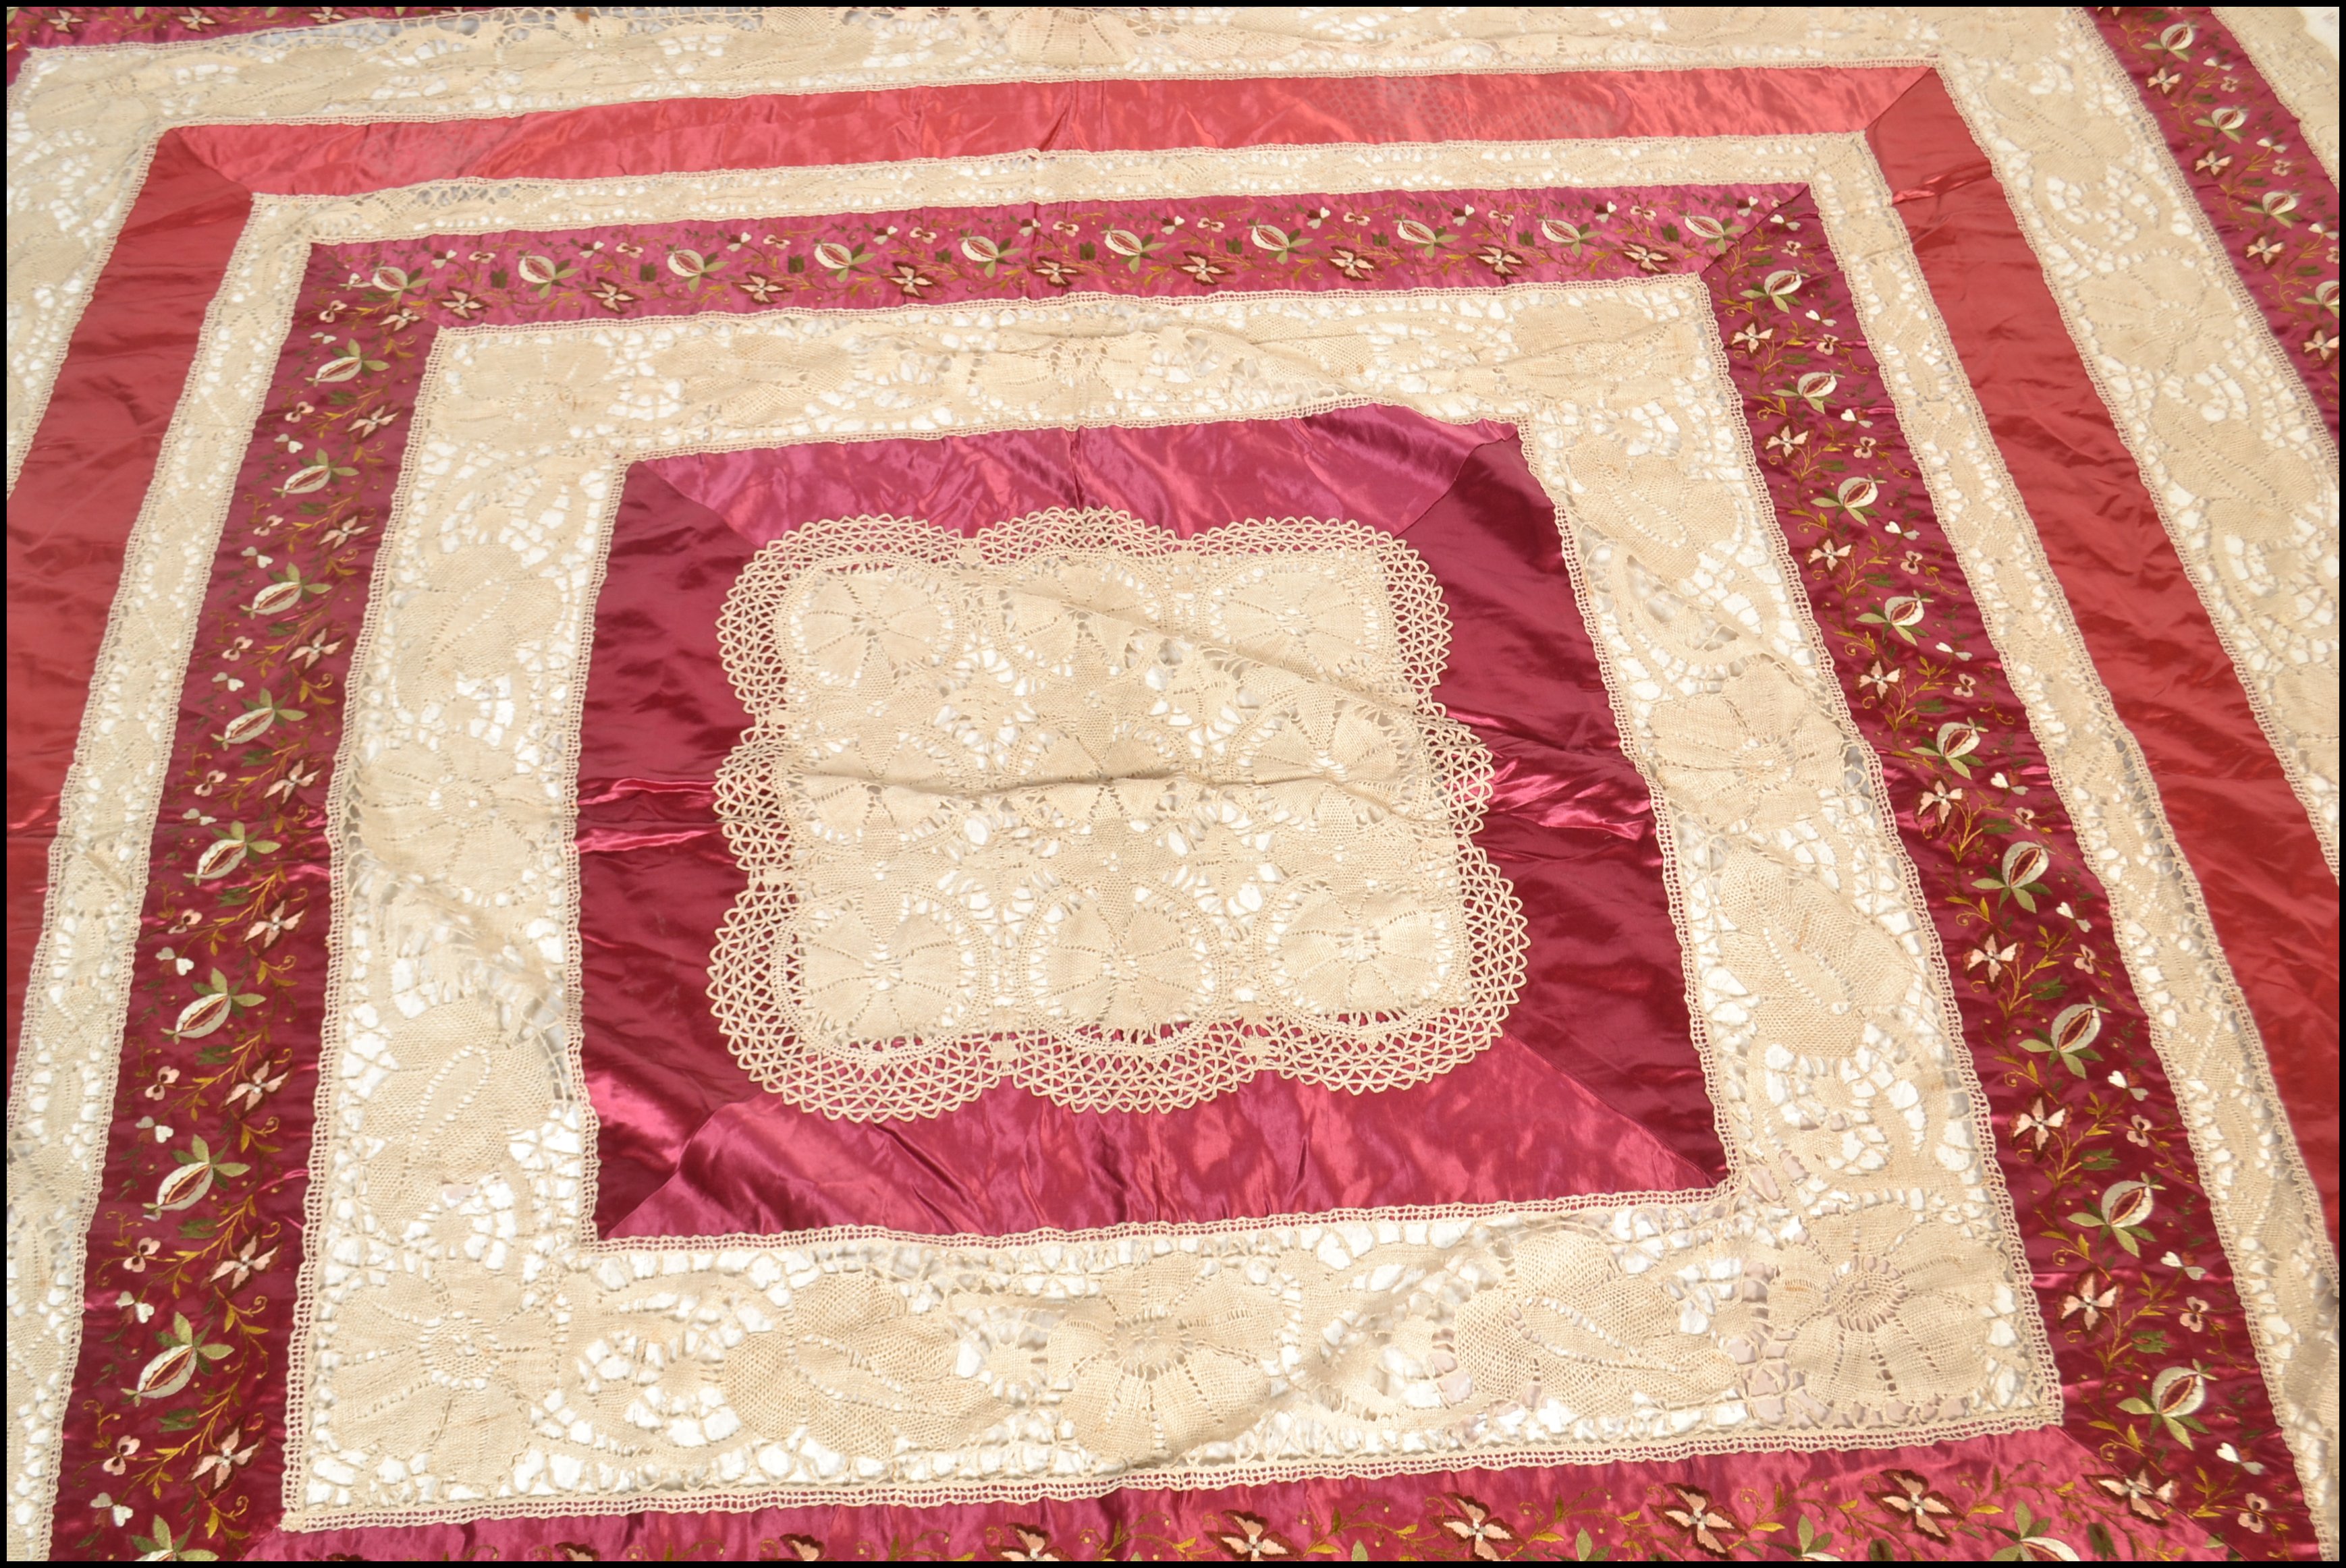 EDWARDIAN SILK AND LACE WORK LARGE BEDSPREAD COVER - Image 5 of 6